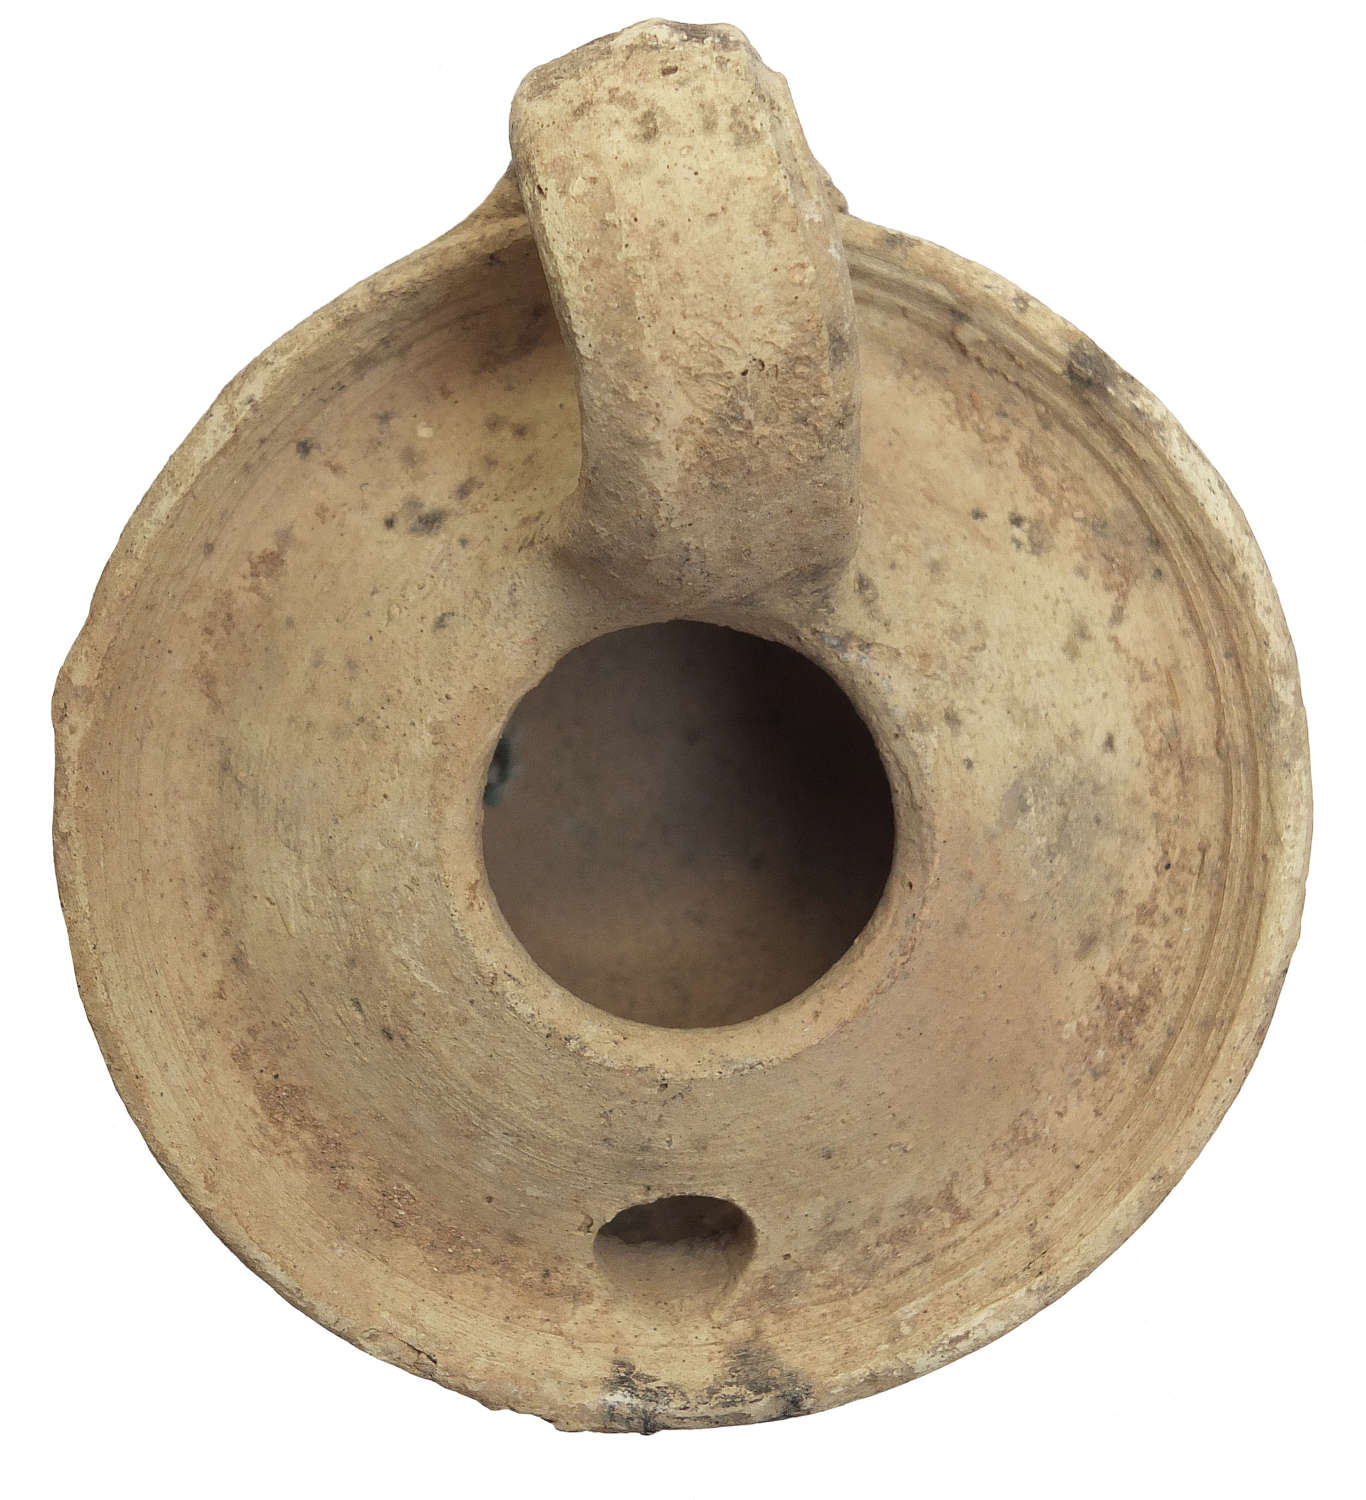 A circular early Islamic pottery oil lamp, c. 8th - 10th Century A.D.